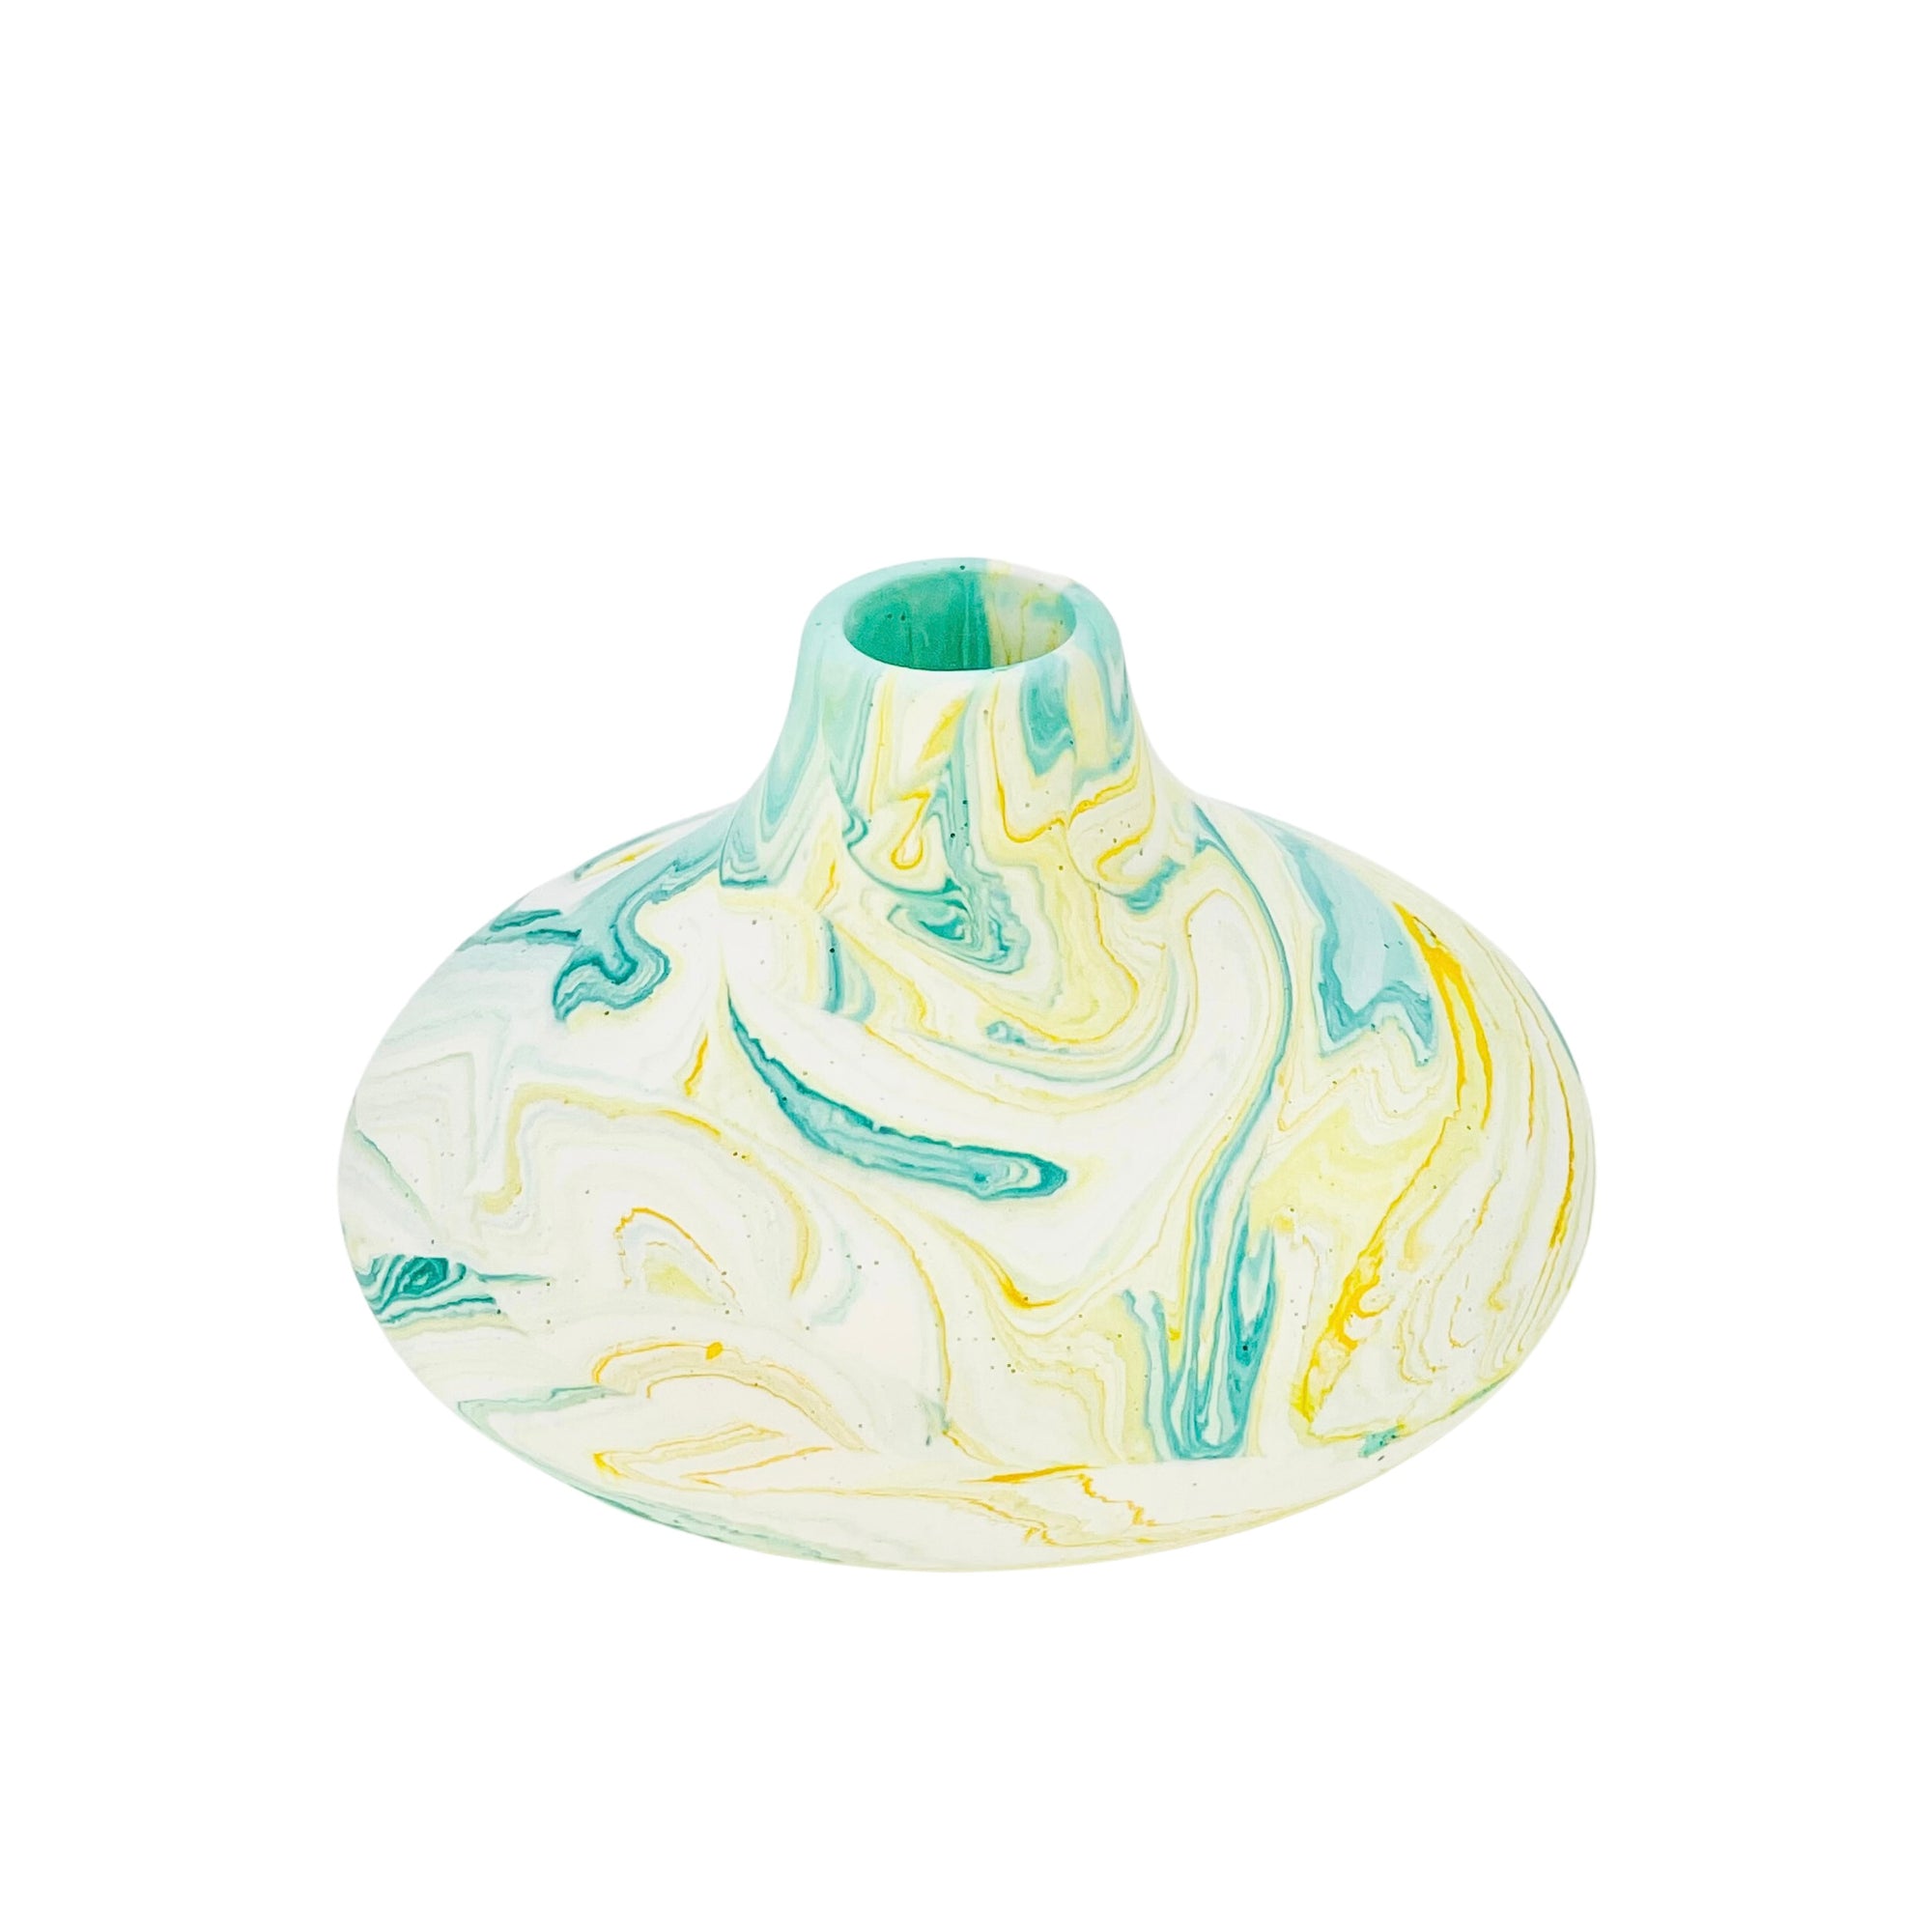 This small bulbous Jesmonite vase is marbled with turquoise and yellow pigment.